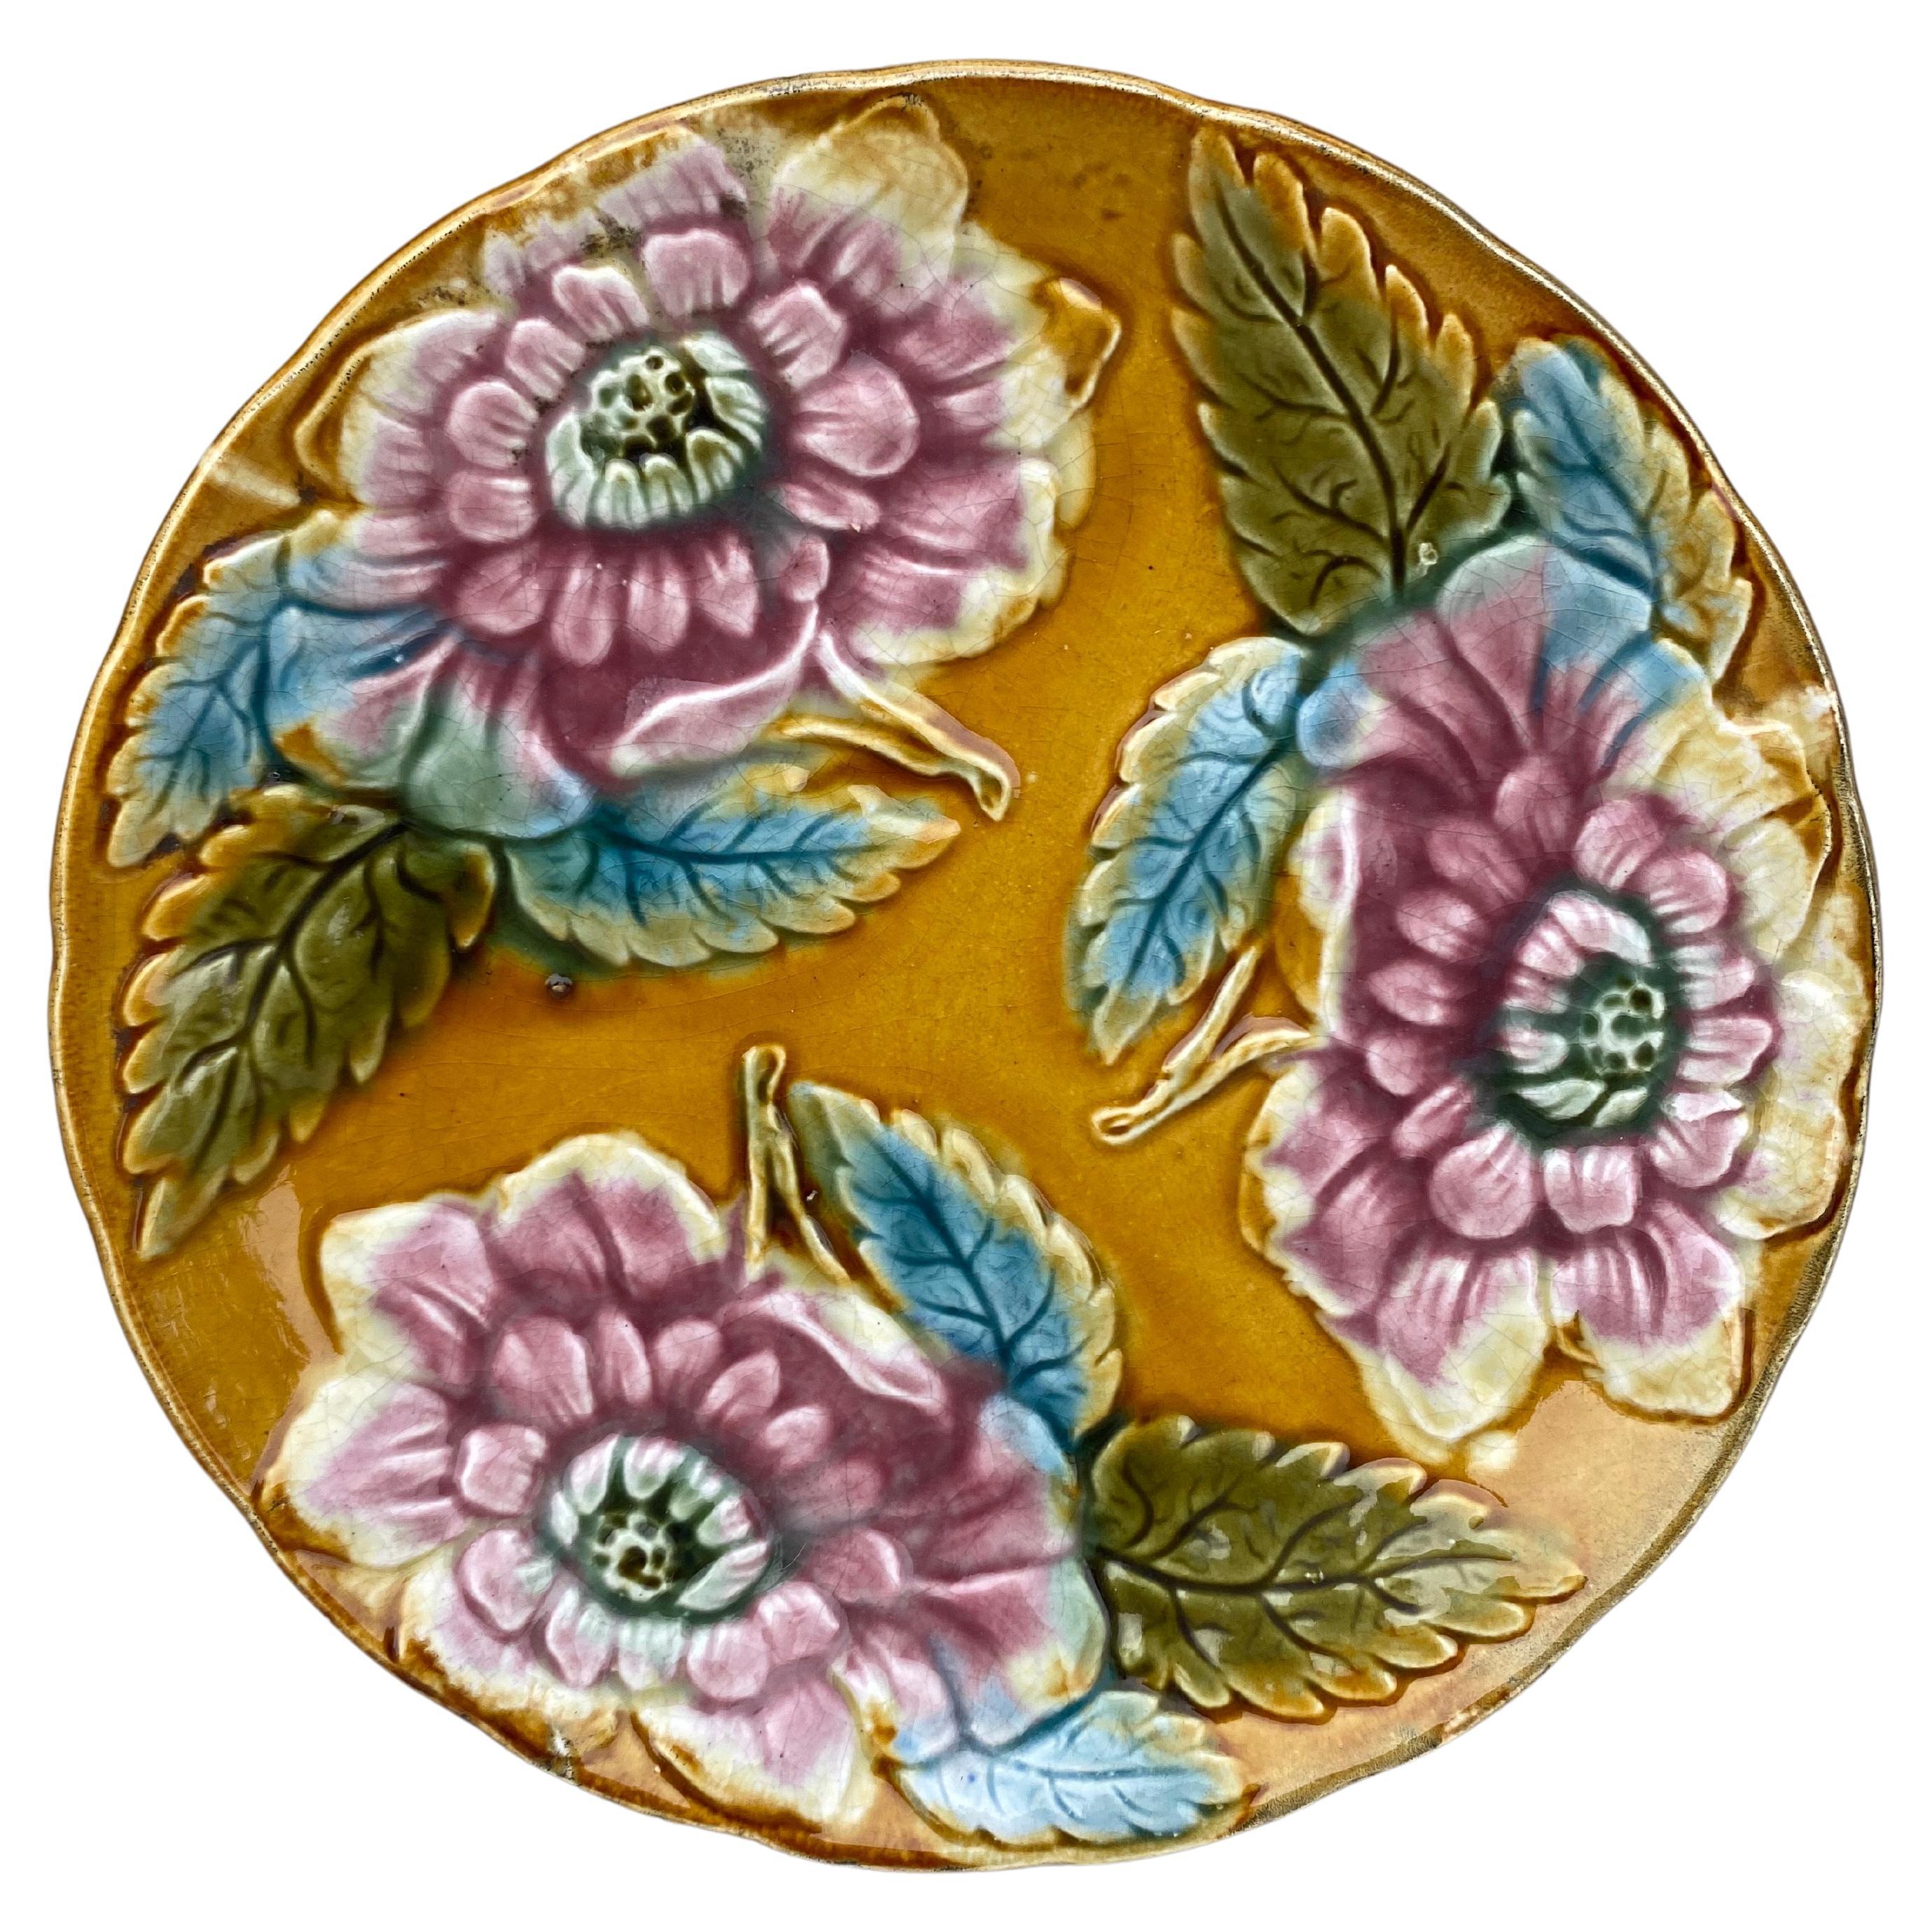 French Yellow Majolica Red Flowers Plate, circa 1890